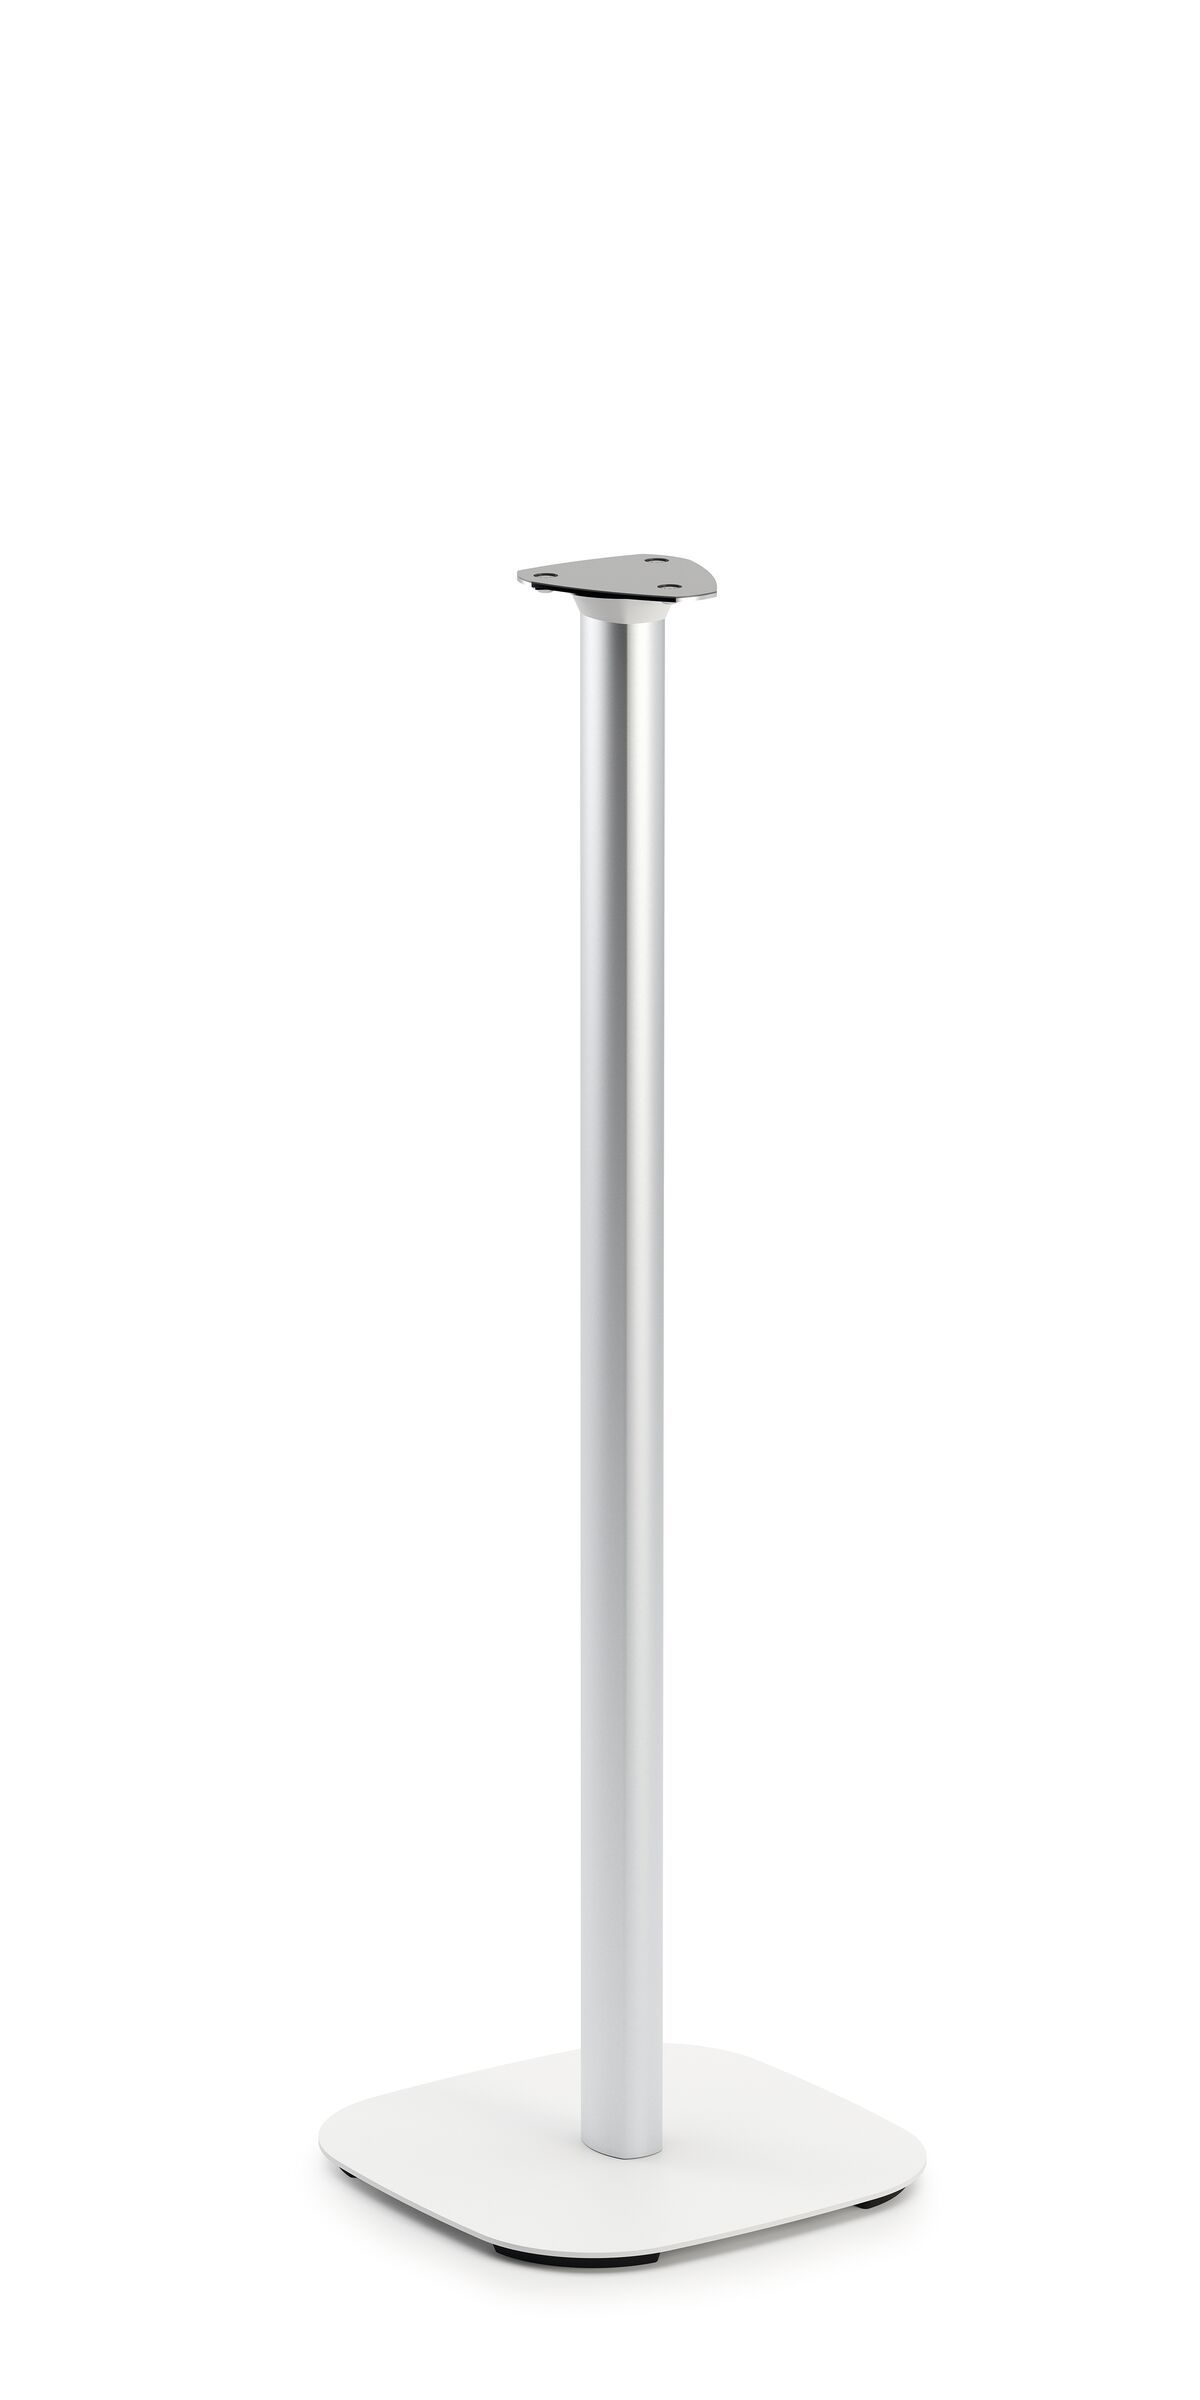 Vogel's SOUND 5313 Speaker Stand for Denon HEOS 1 / HEOS 3 (white) - Product